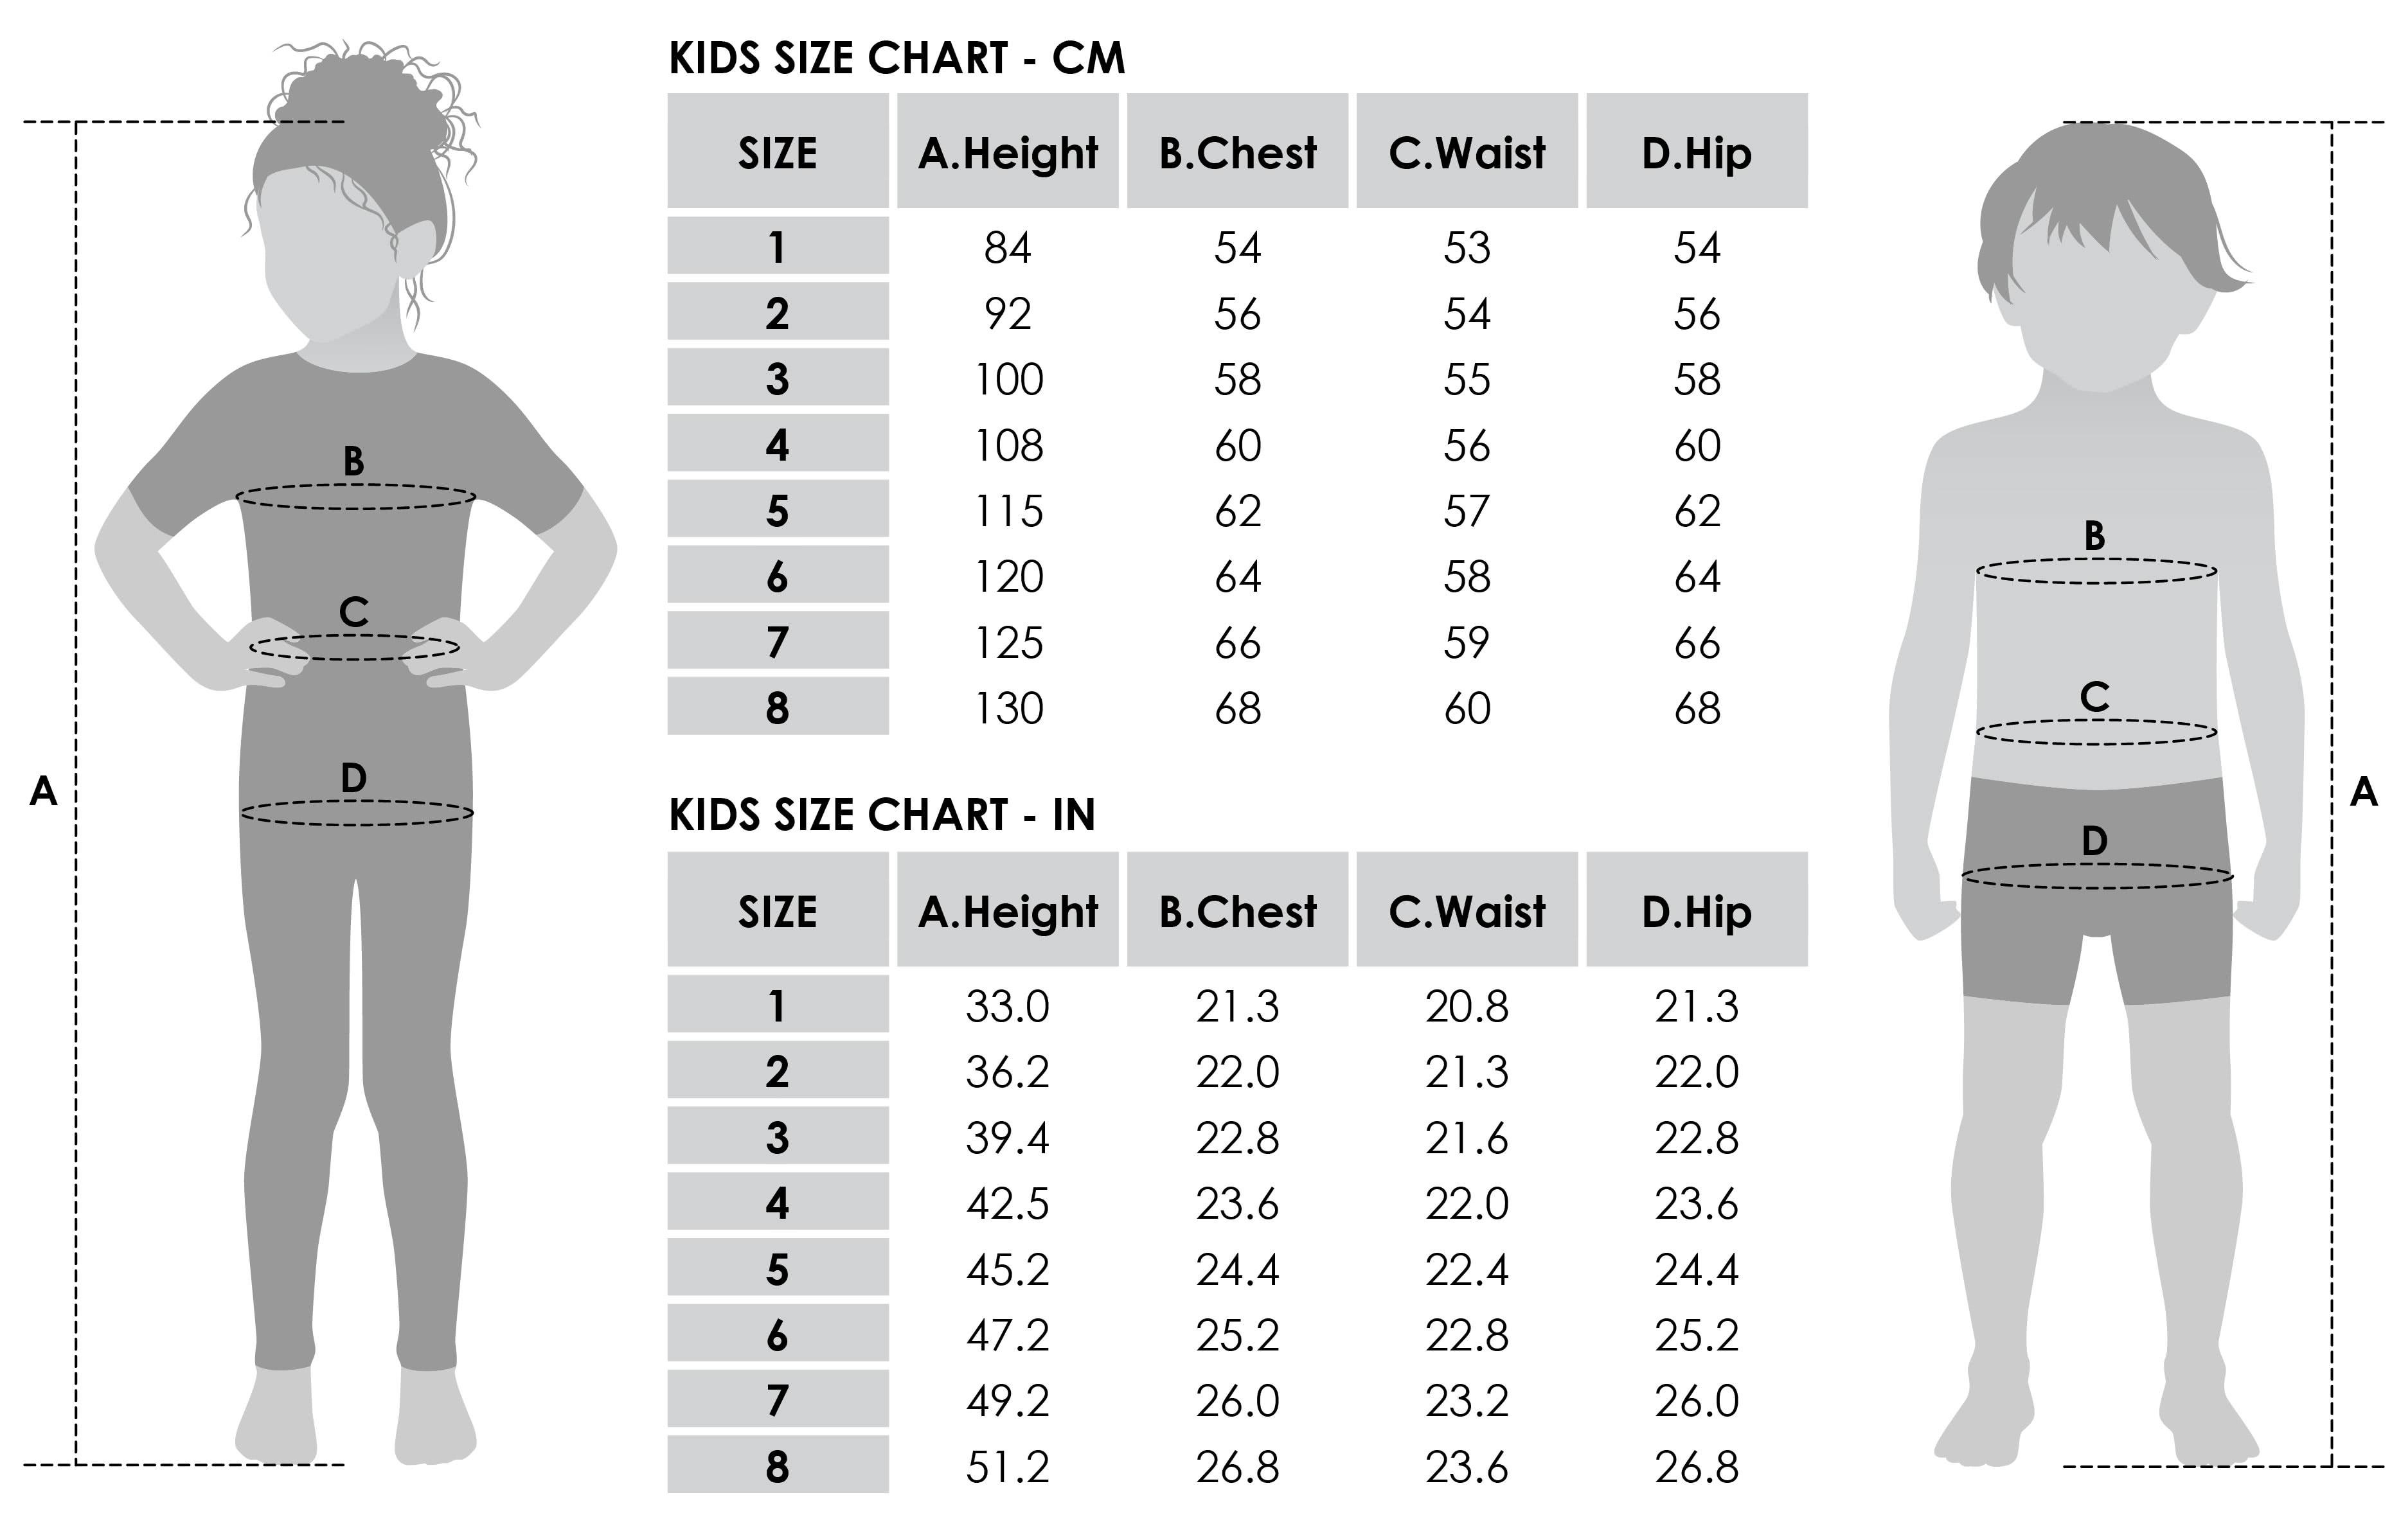 size chart for kids in cm